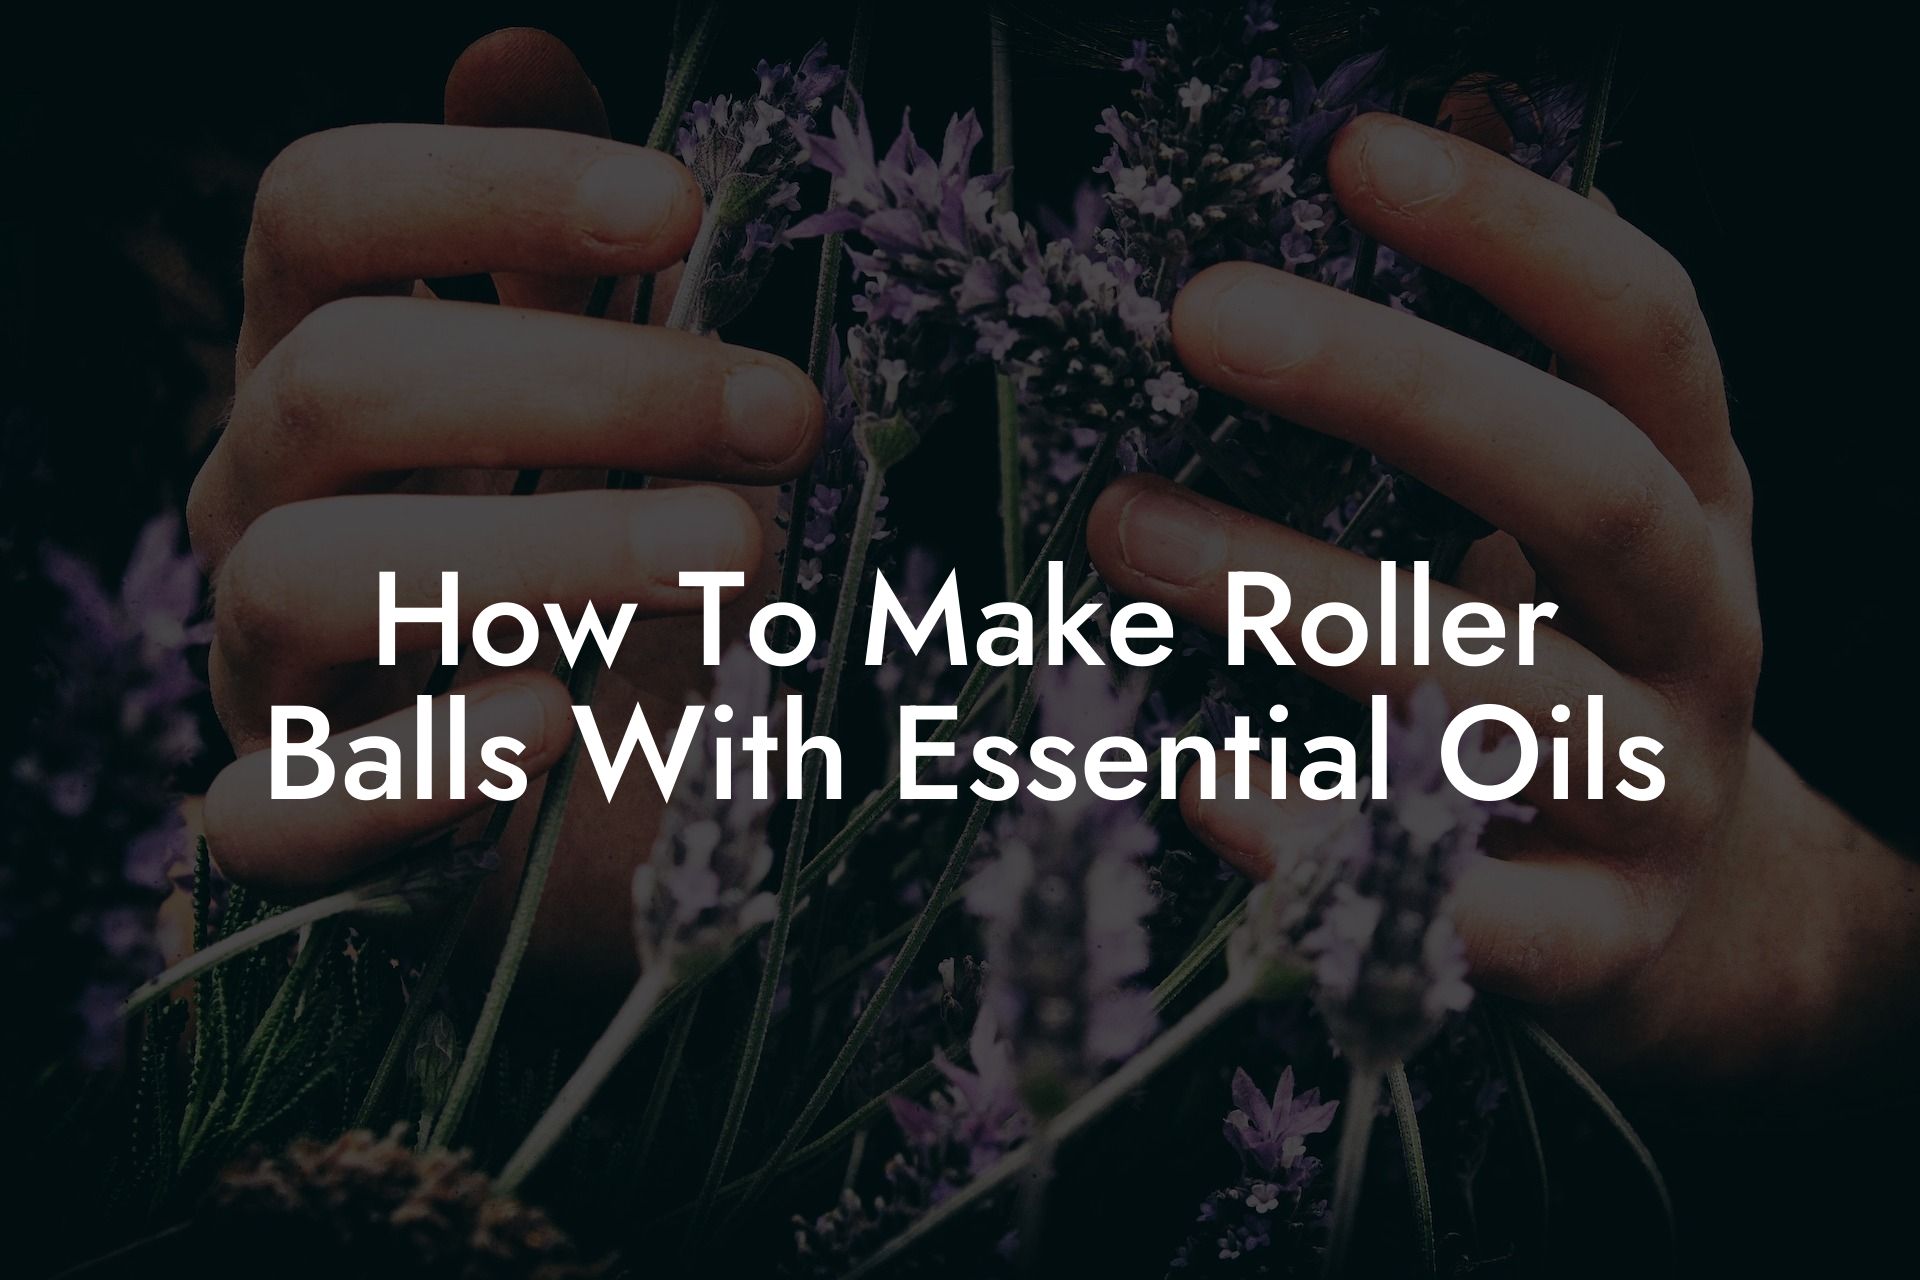 How To Make Roller Balls With Essential Oils